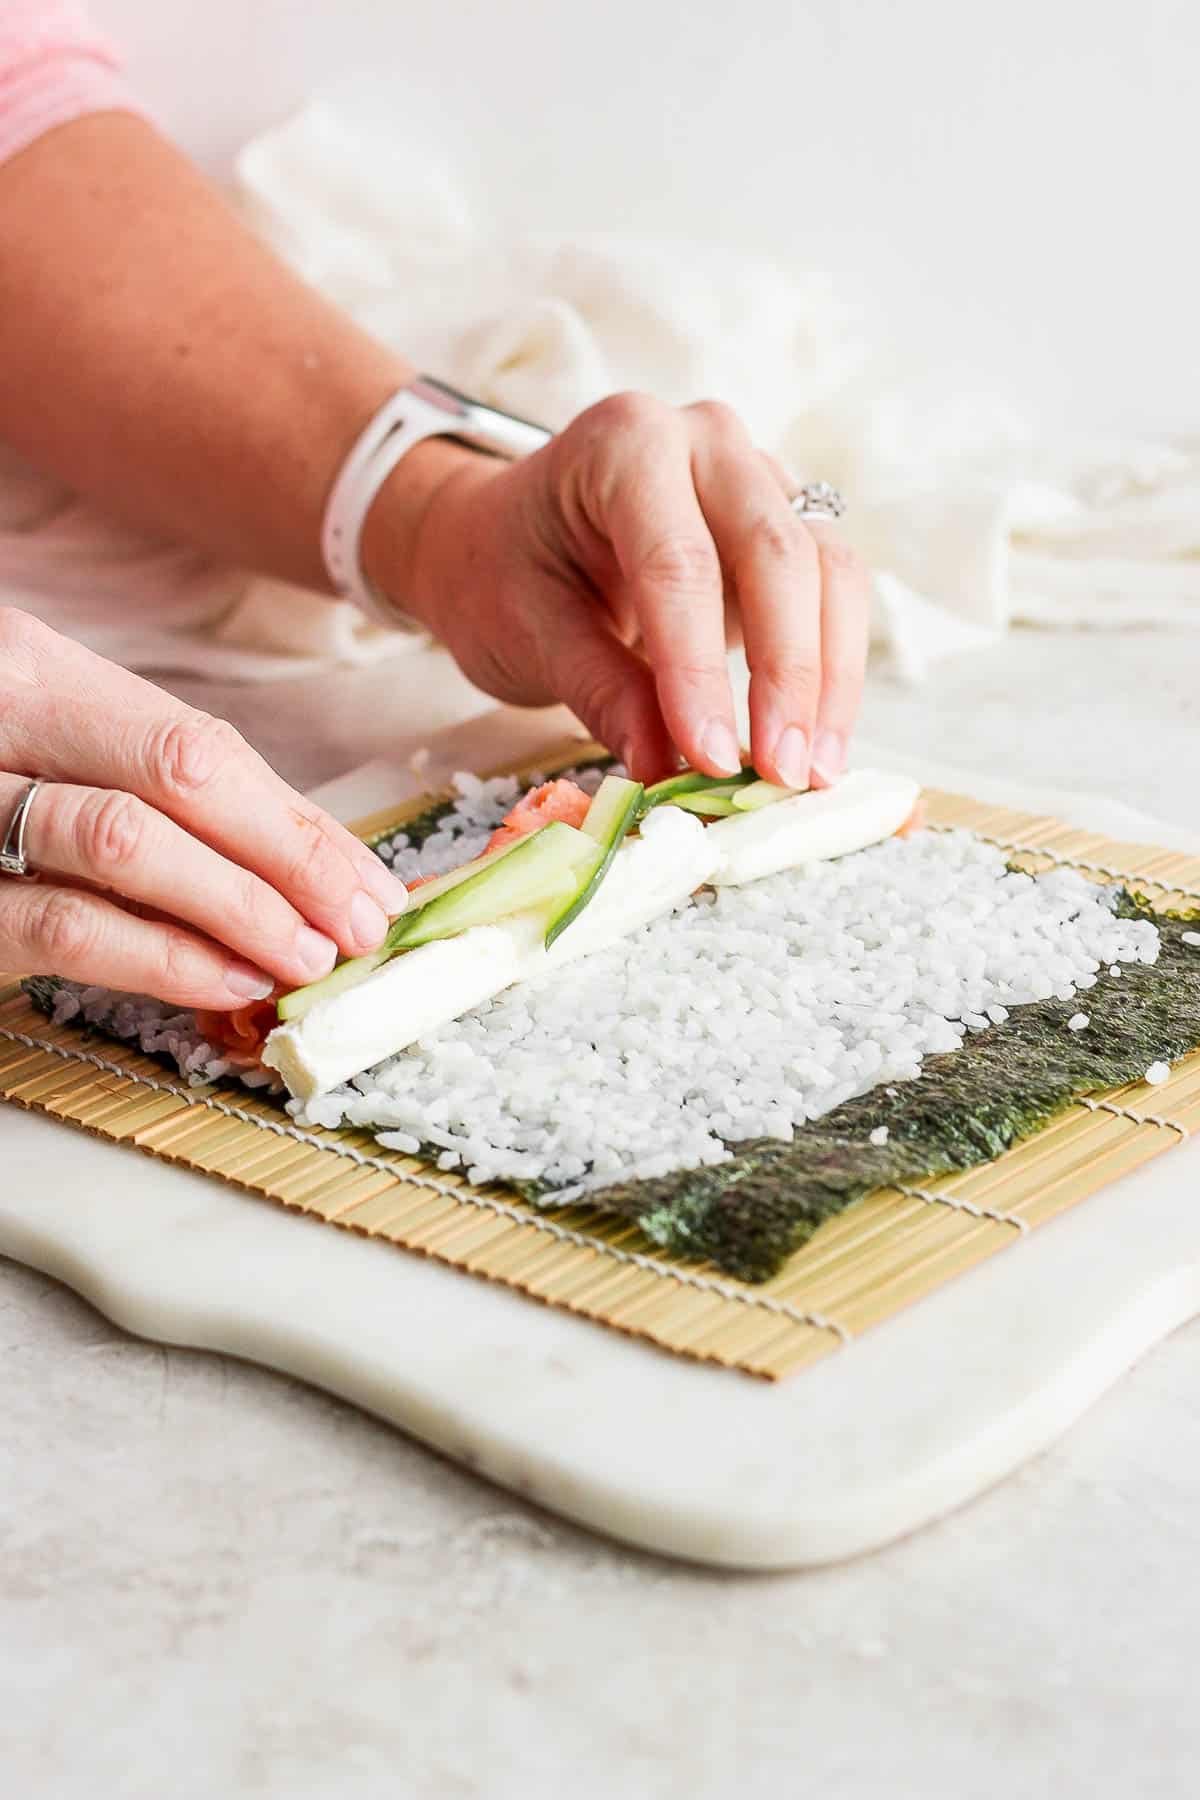 Two hands placing the filling ingredients towards the bottom of the nori sheet.